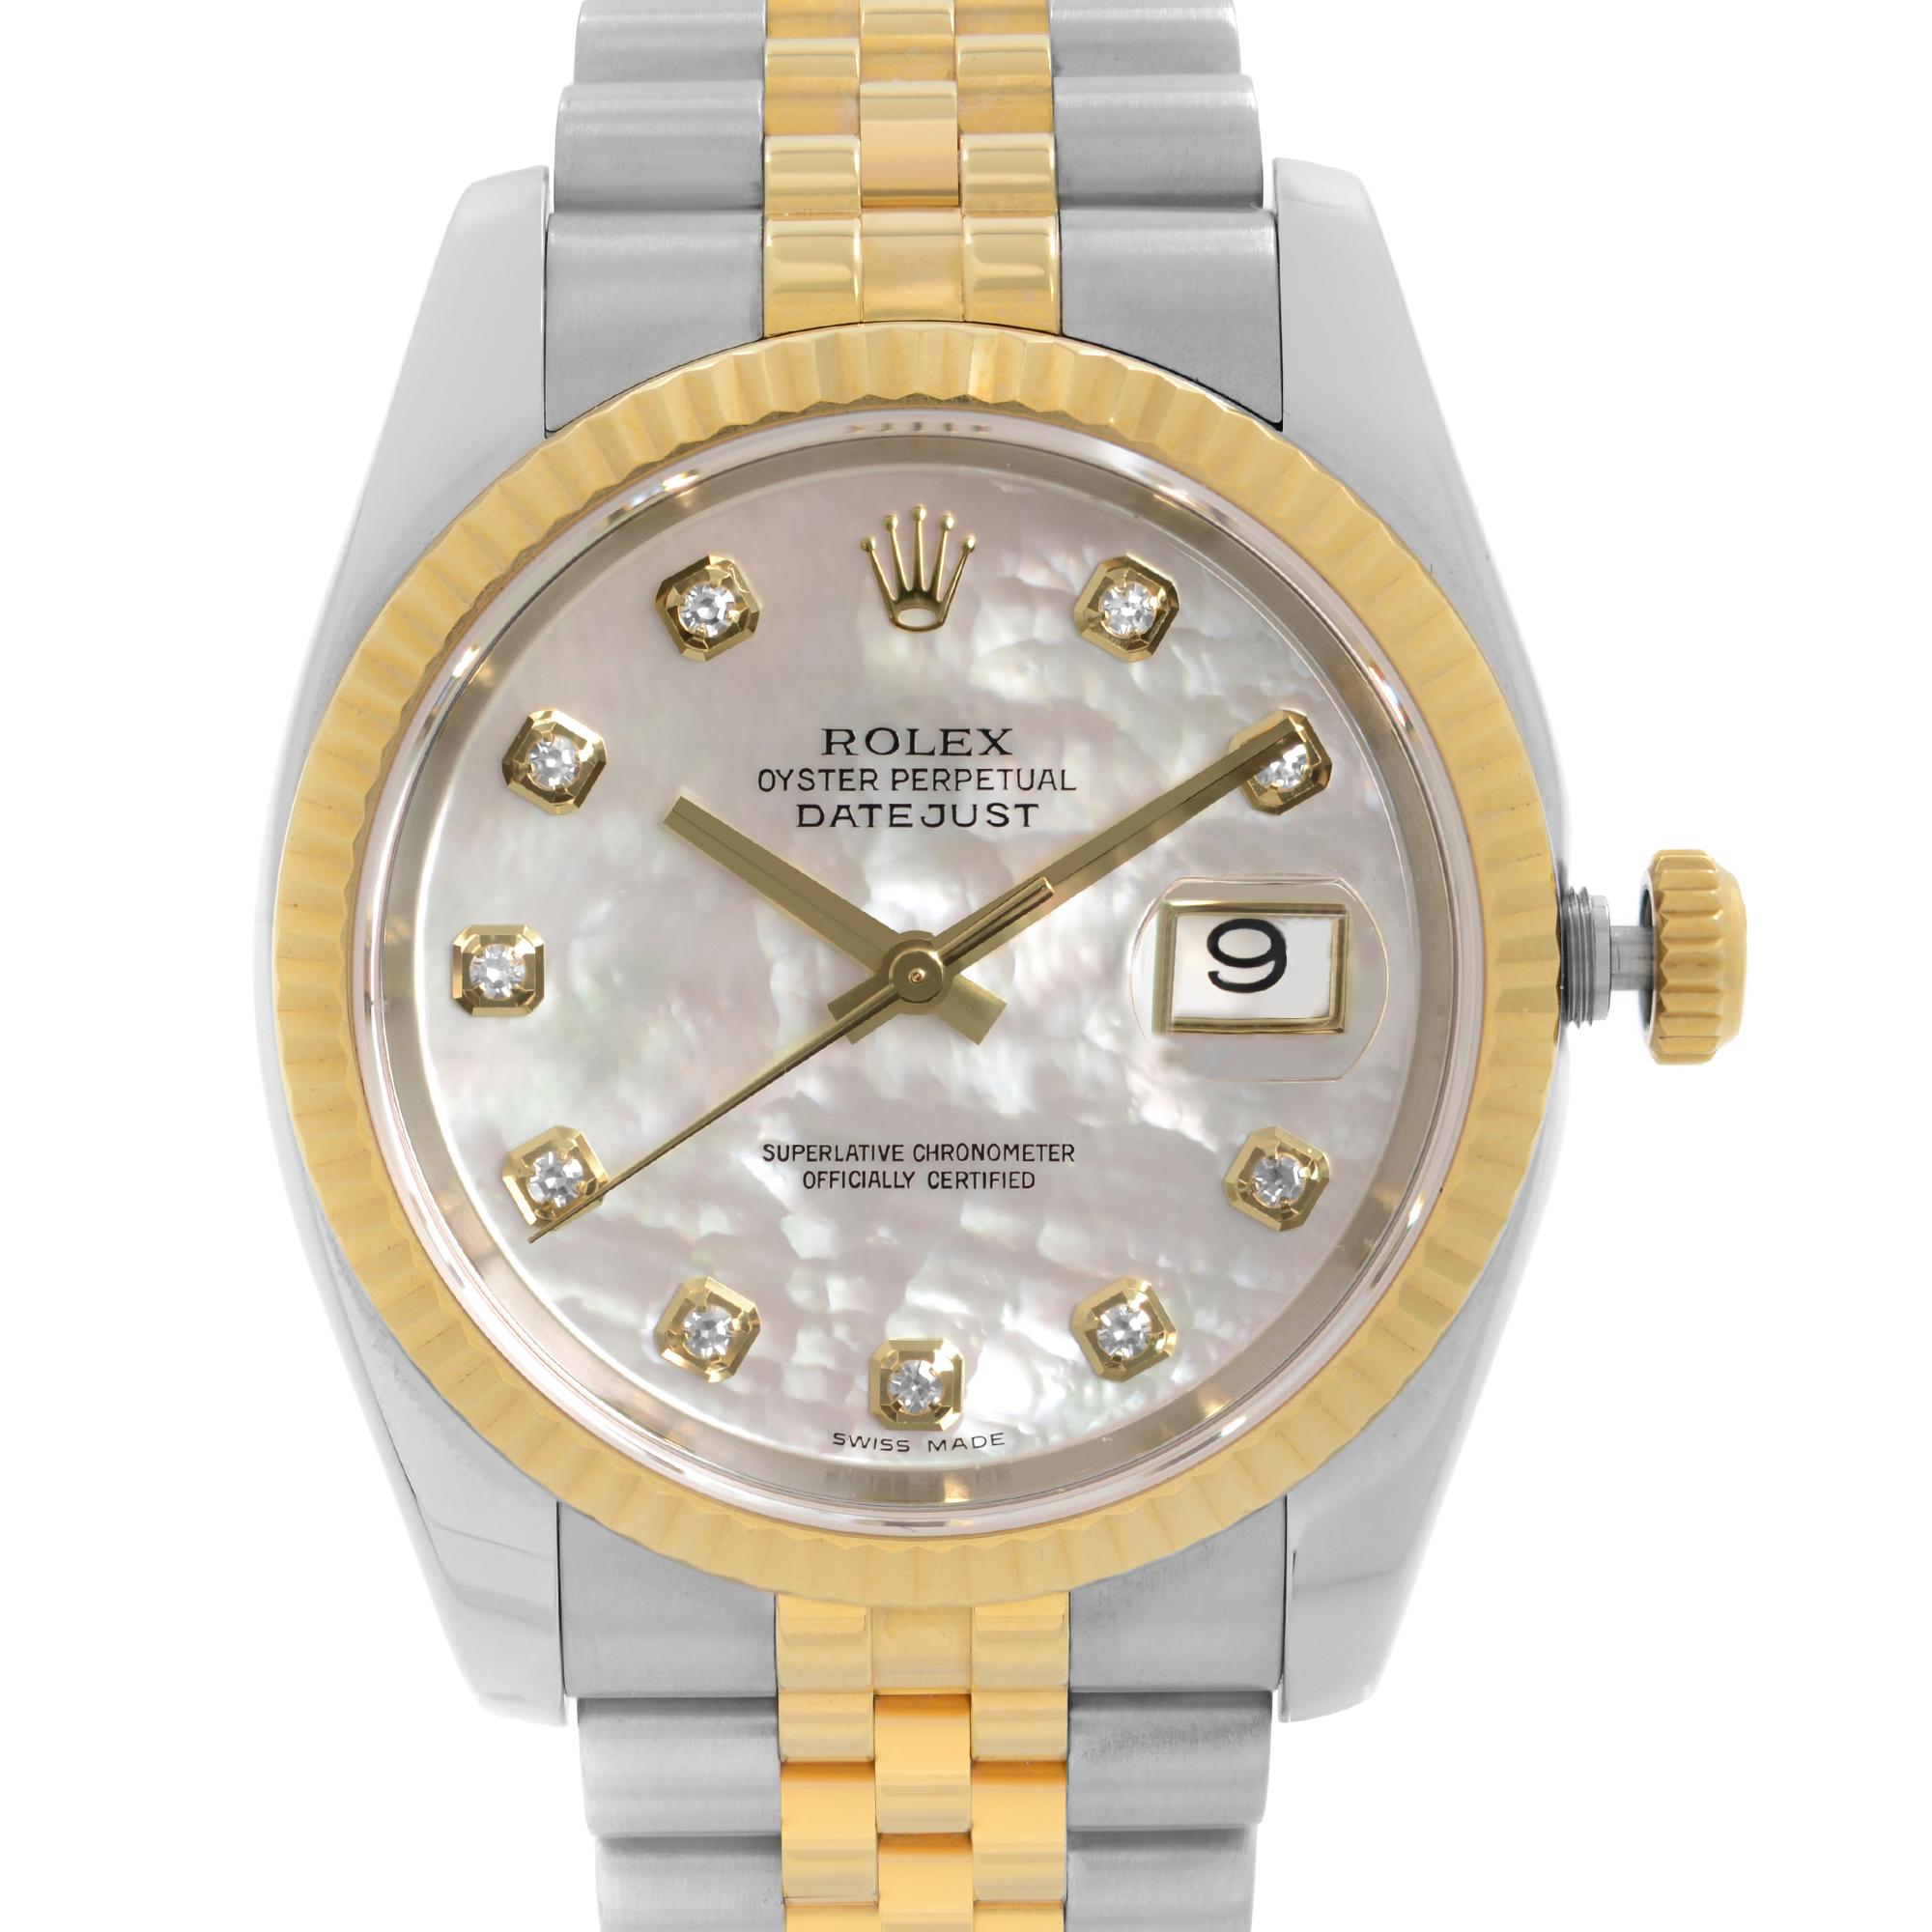 Pre-owned Rolex Datejust 36 18k Yellow Gold MOP Factory Diamond Dial Automatic Men's Watch 116233. This Beautiful Timepiece was Produced in 2006 and is Powered by a Automatic Movement and Features: Stainless Steel Case with a Two-Tone Jubilee